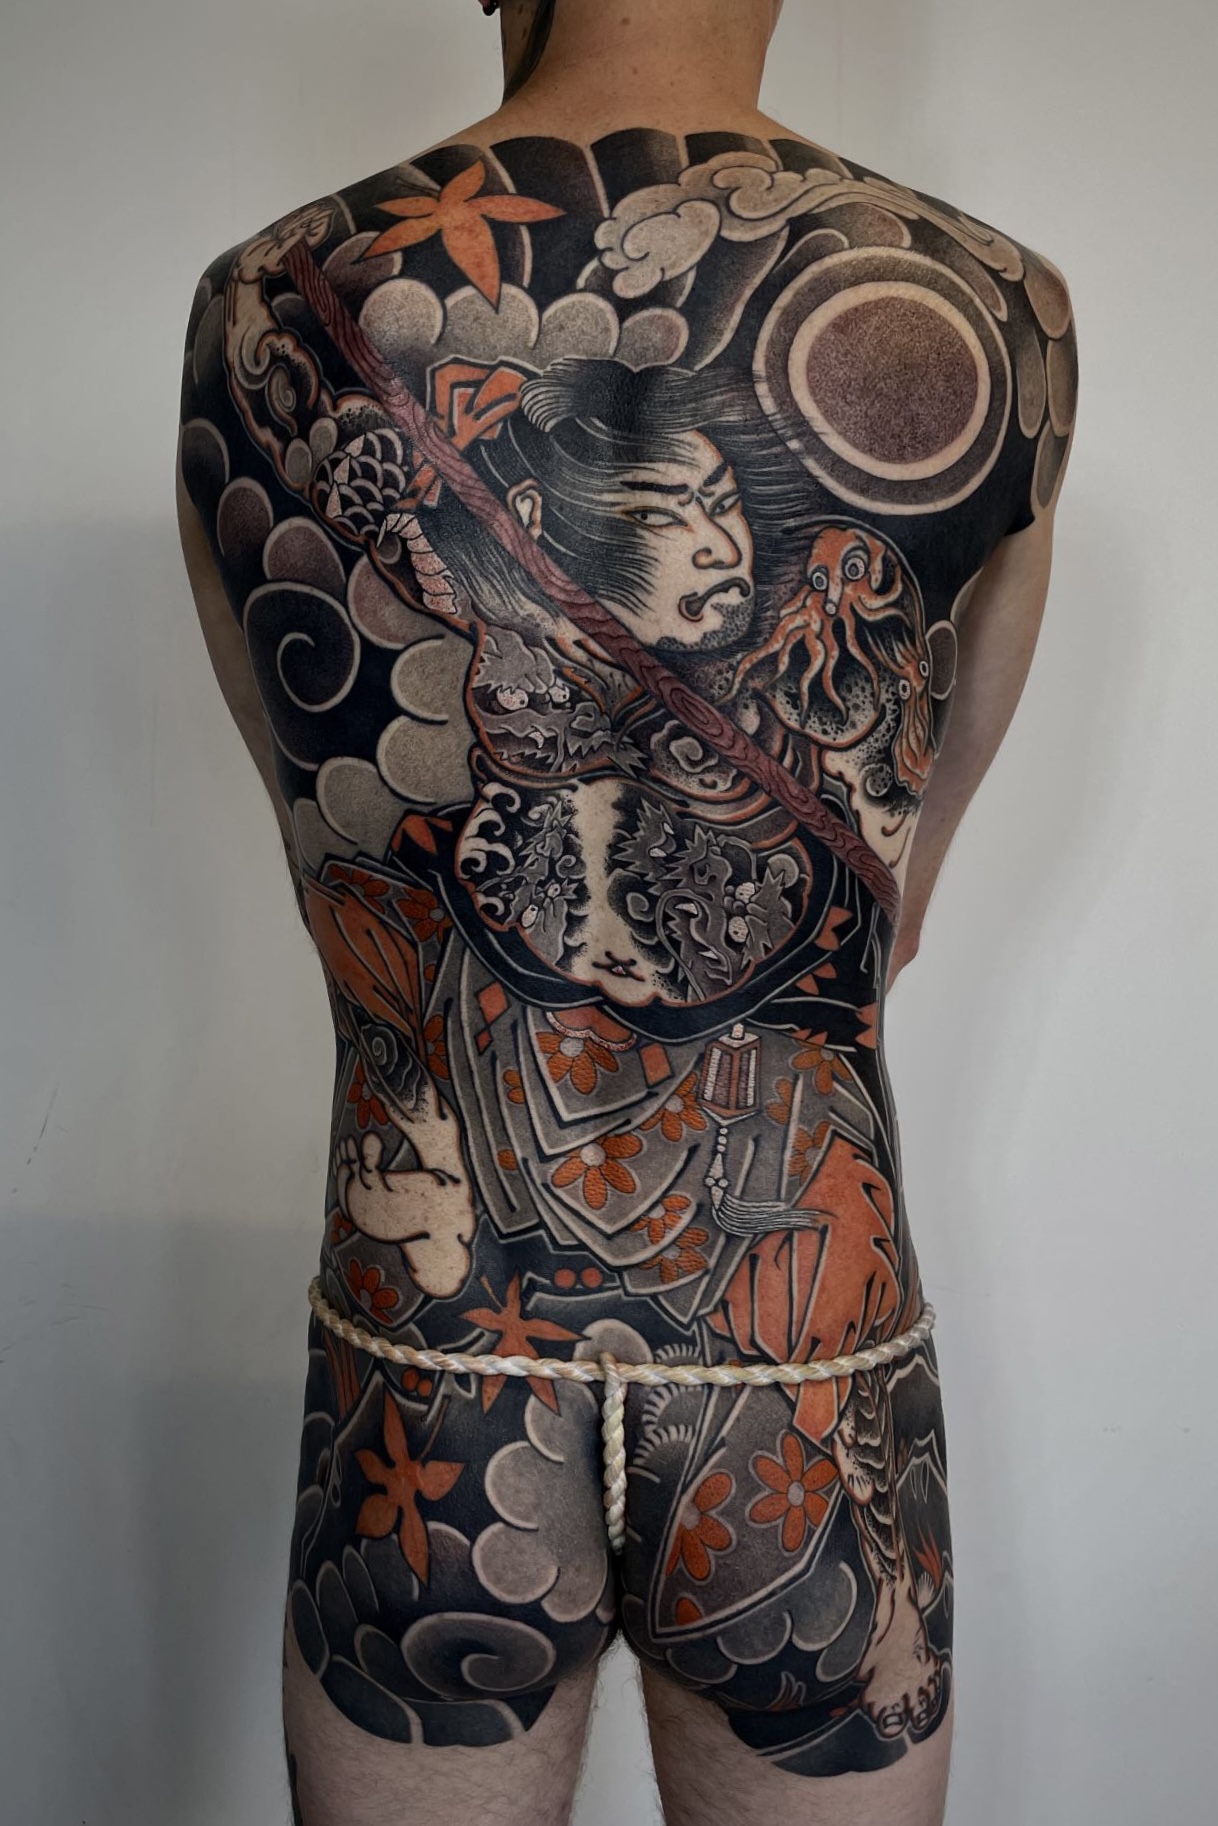 Dreamhands Tattoo - Full body suit was done by Ethan. If you are looking to  customise Japanese style tattoo. Get in touch at www.dhtattoo.co.nz  #japanesetattoo #tradtattoo #traditionaltattoo #colourtattoo #tattooart  #tattoolovers #tattooartist #nztattoo